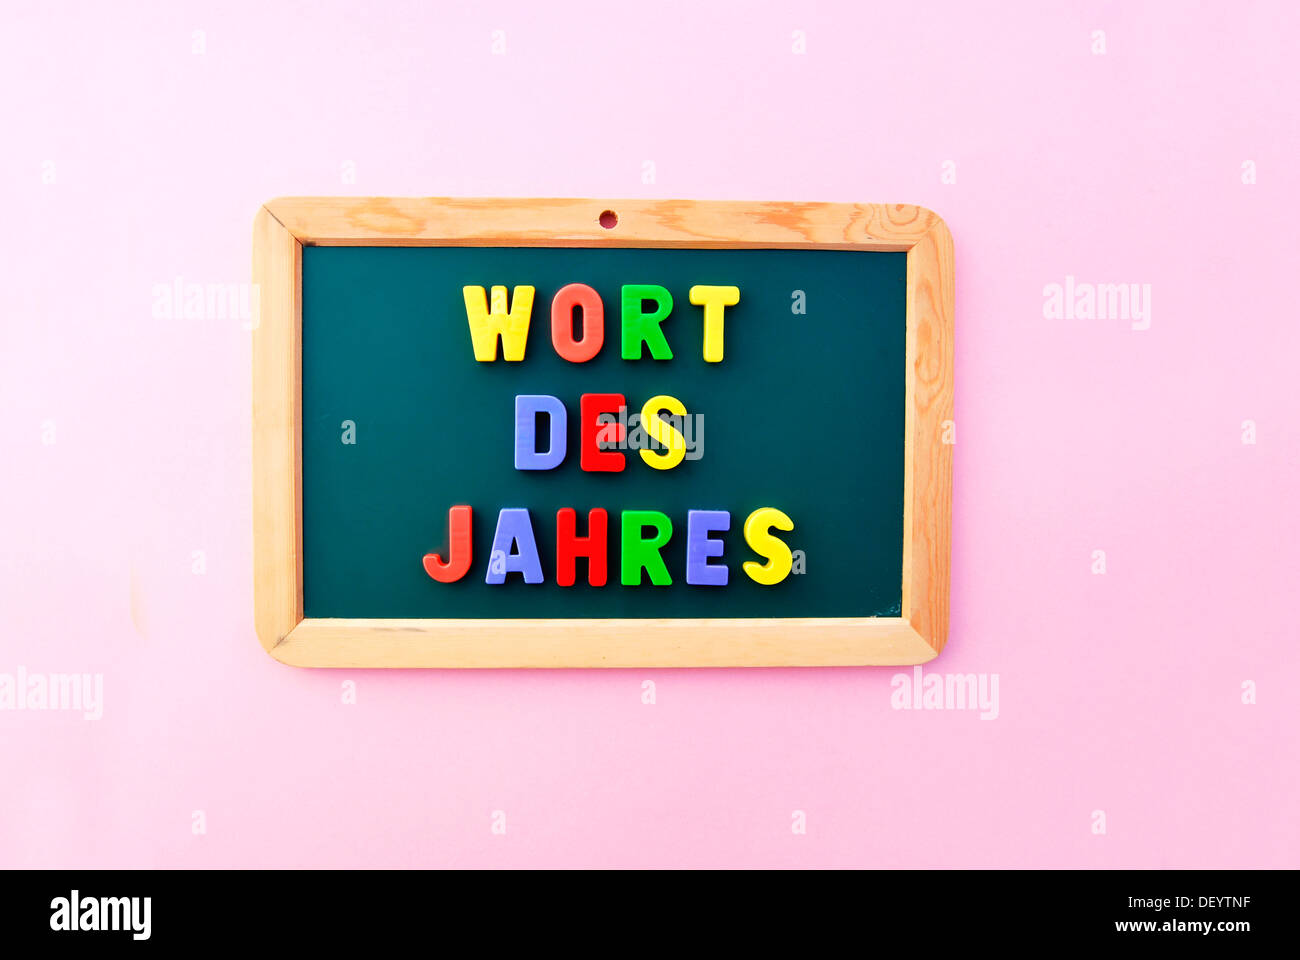 Wort des Jahres, German for Word of the Year, written in colourful magnetic letters on a school board Stock Photo